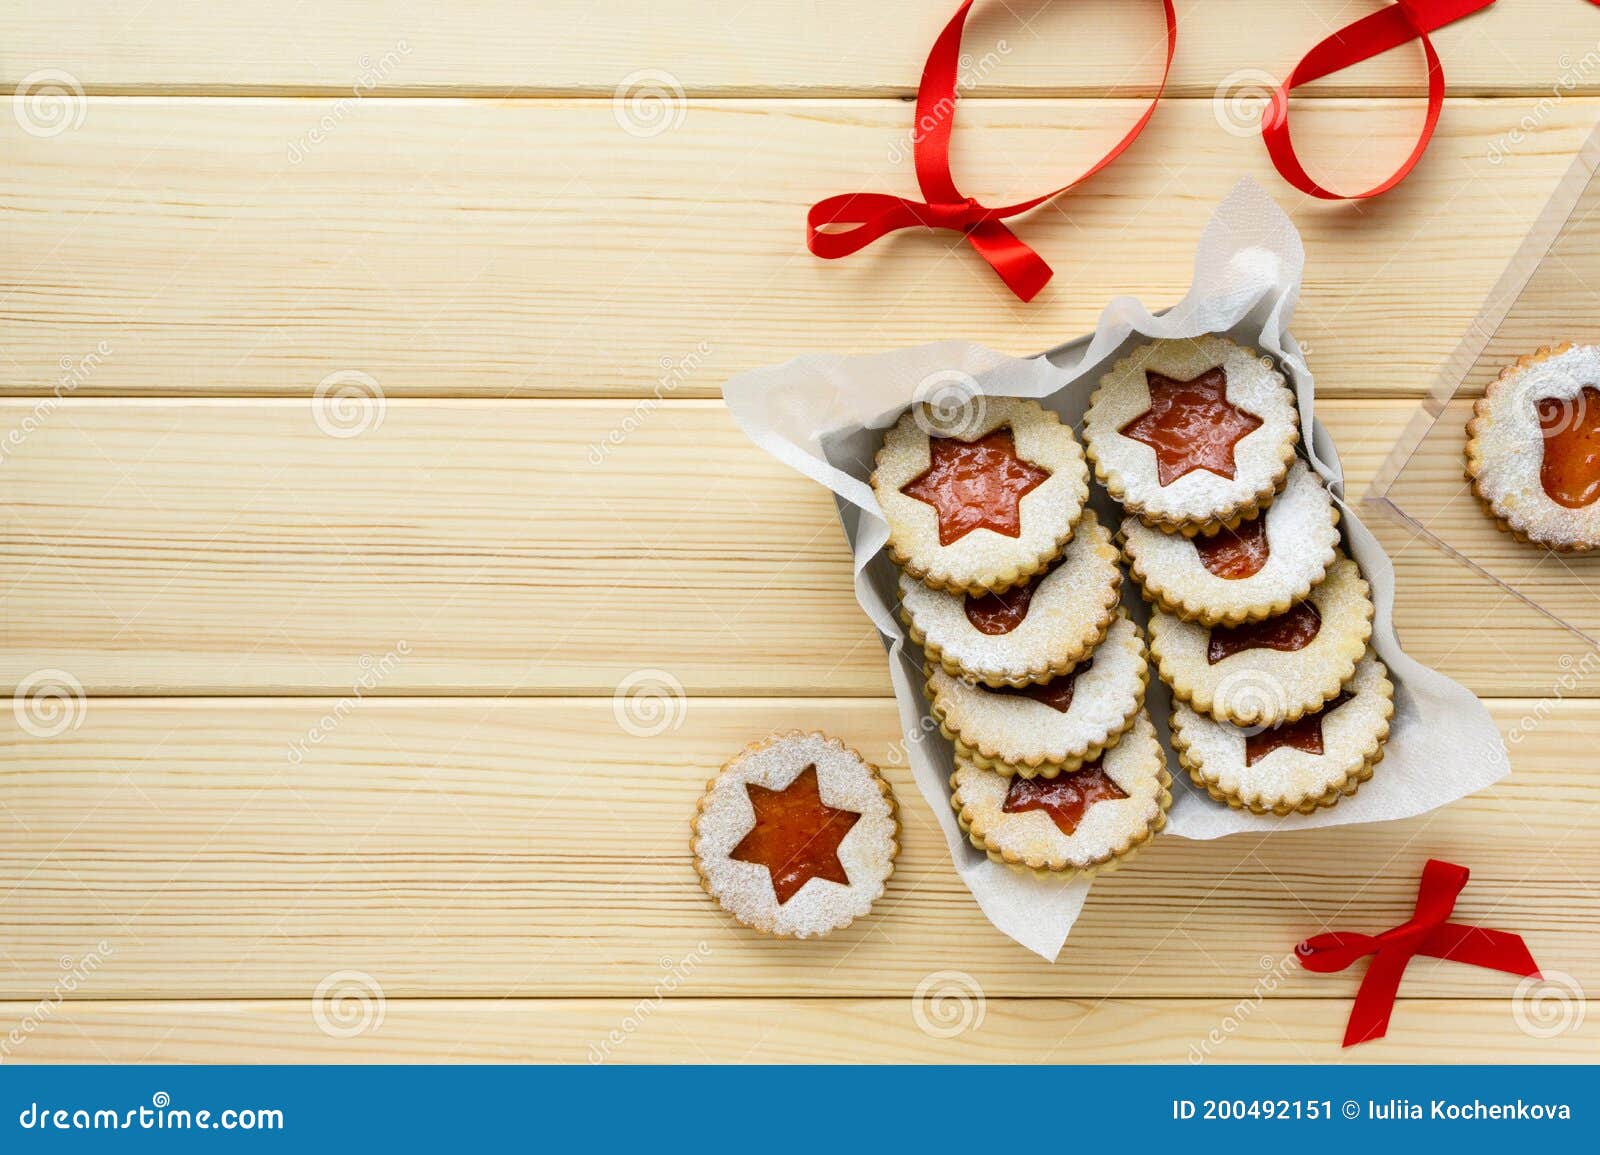 Traditional Austrian Christmas Linzer Cookies With Jam And Powdered Sugar In Box On Wooden Background Stock Image Image Of Celebration Austrian 200492151